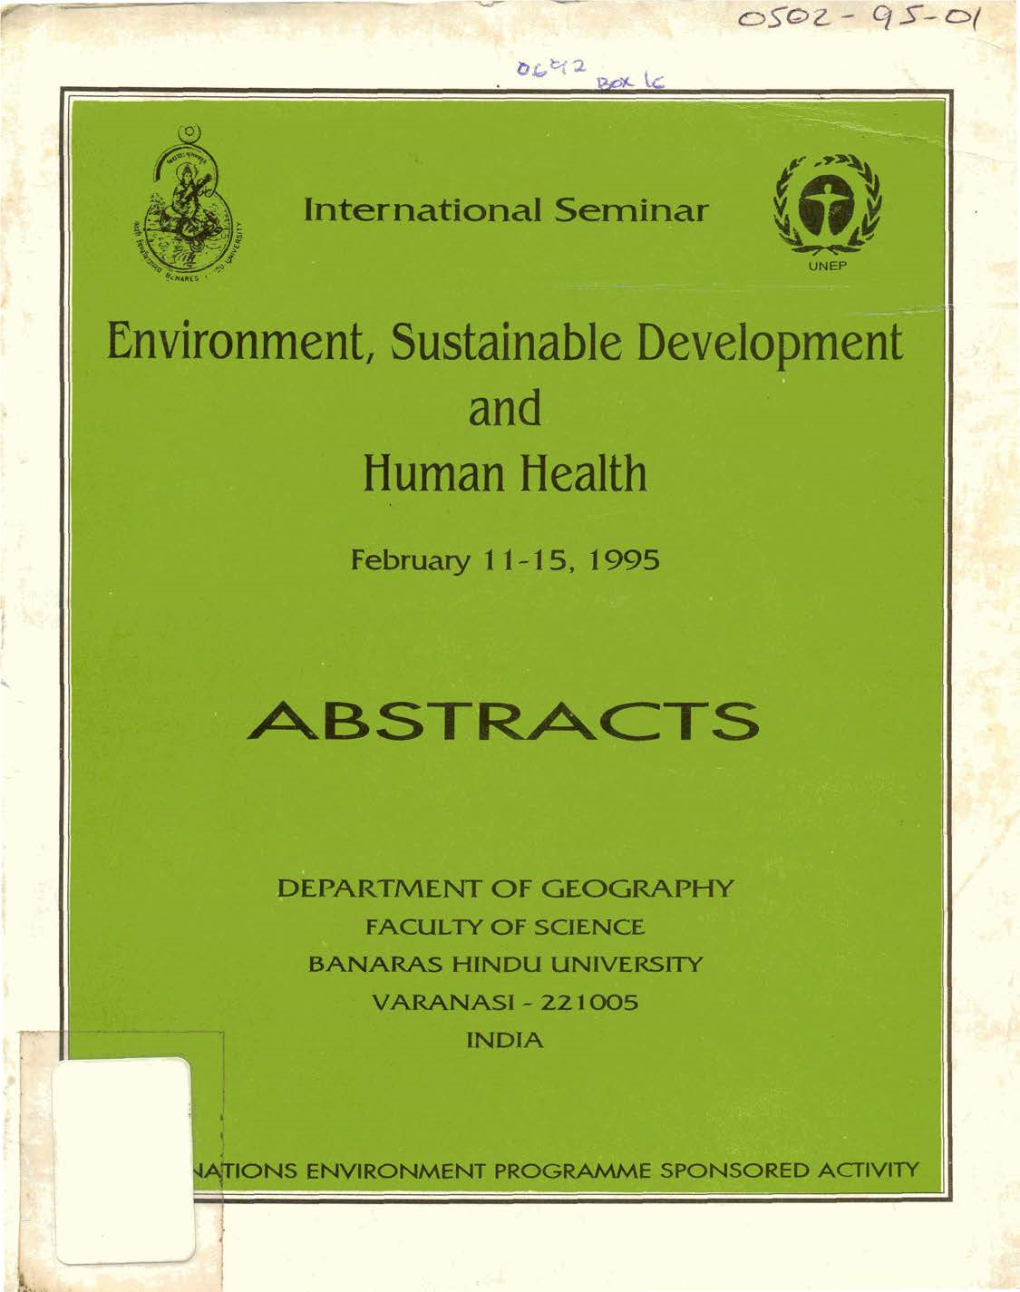 Environment, Sustainable Development and Human Health